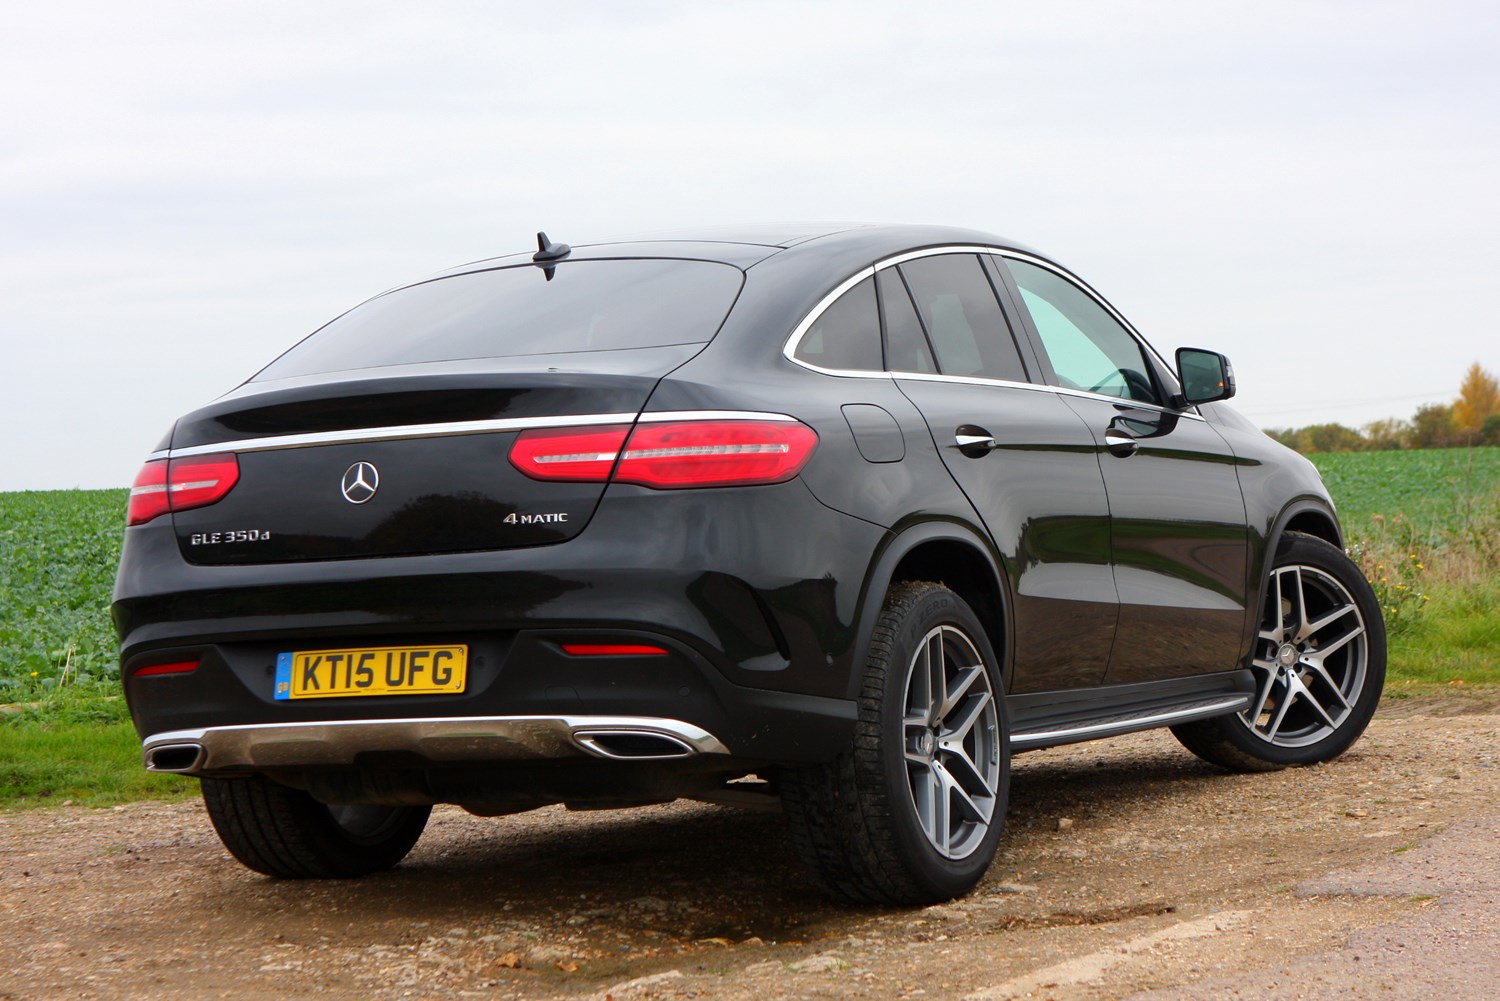 Used Mercedes-Benz GLE-Class Coupe (2015 - 2019) Review | Parkers